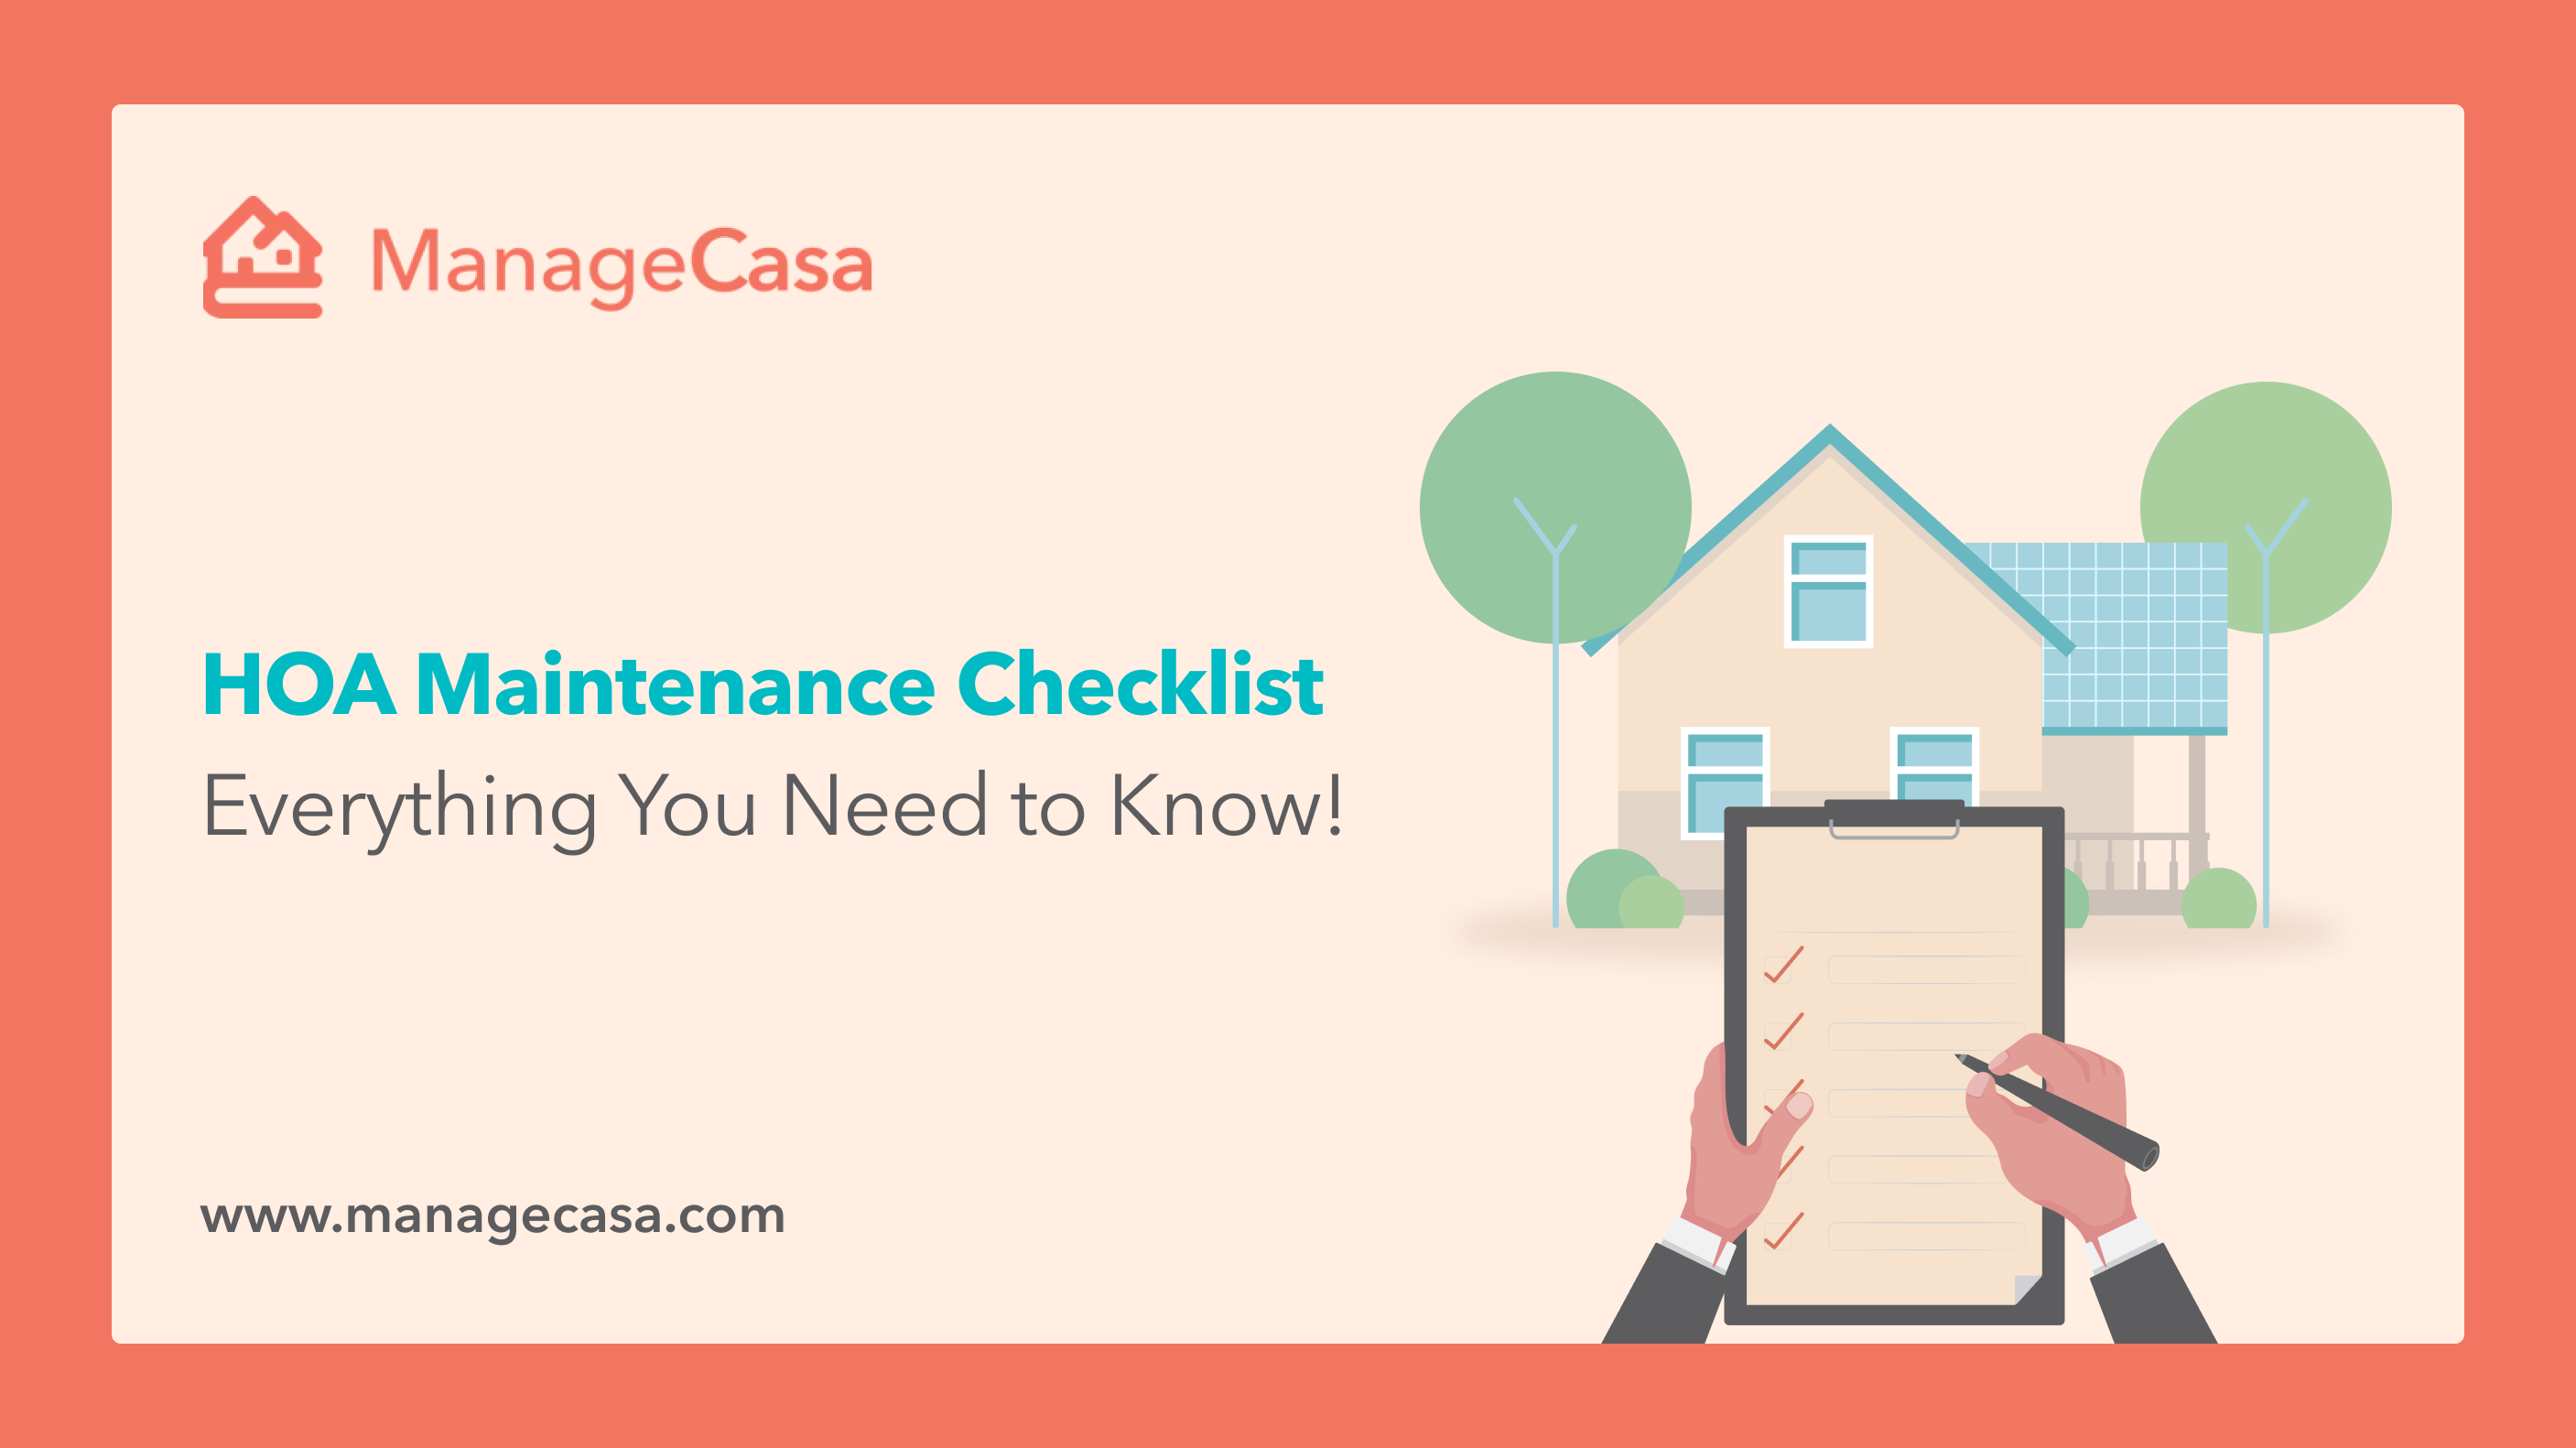 HOA Maintenance Checklist: Everything You Need to Know!